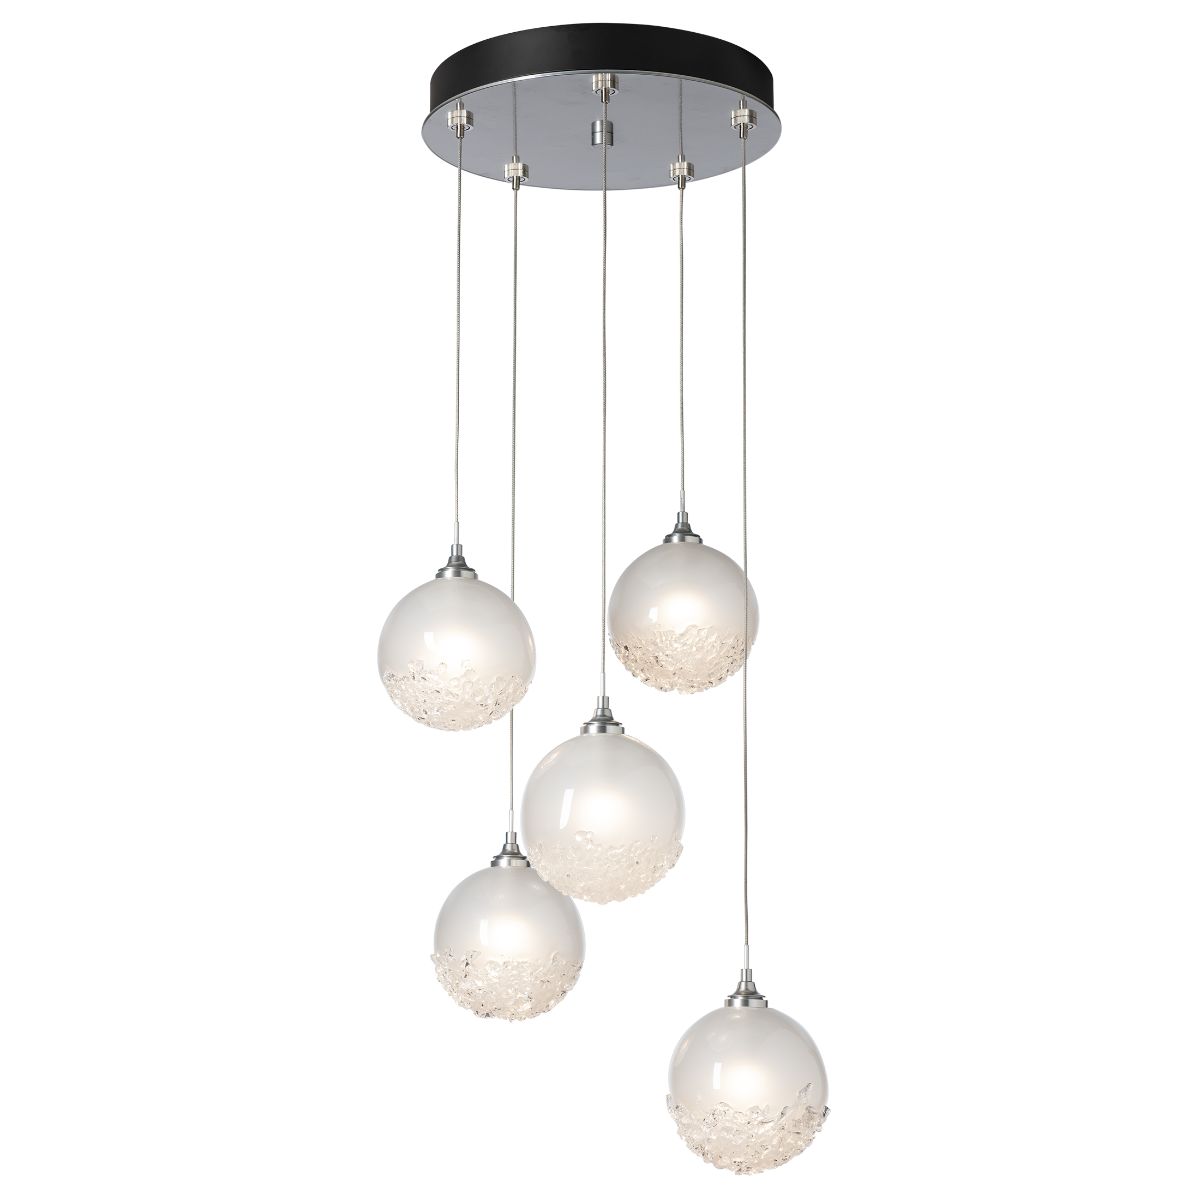 Fritz 5 lights Pendant Light with Long Height